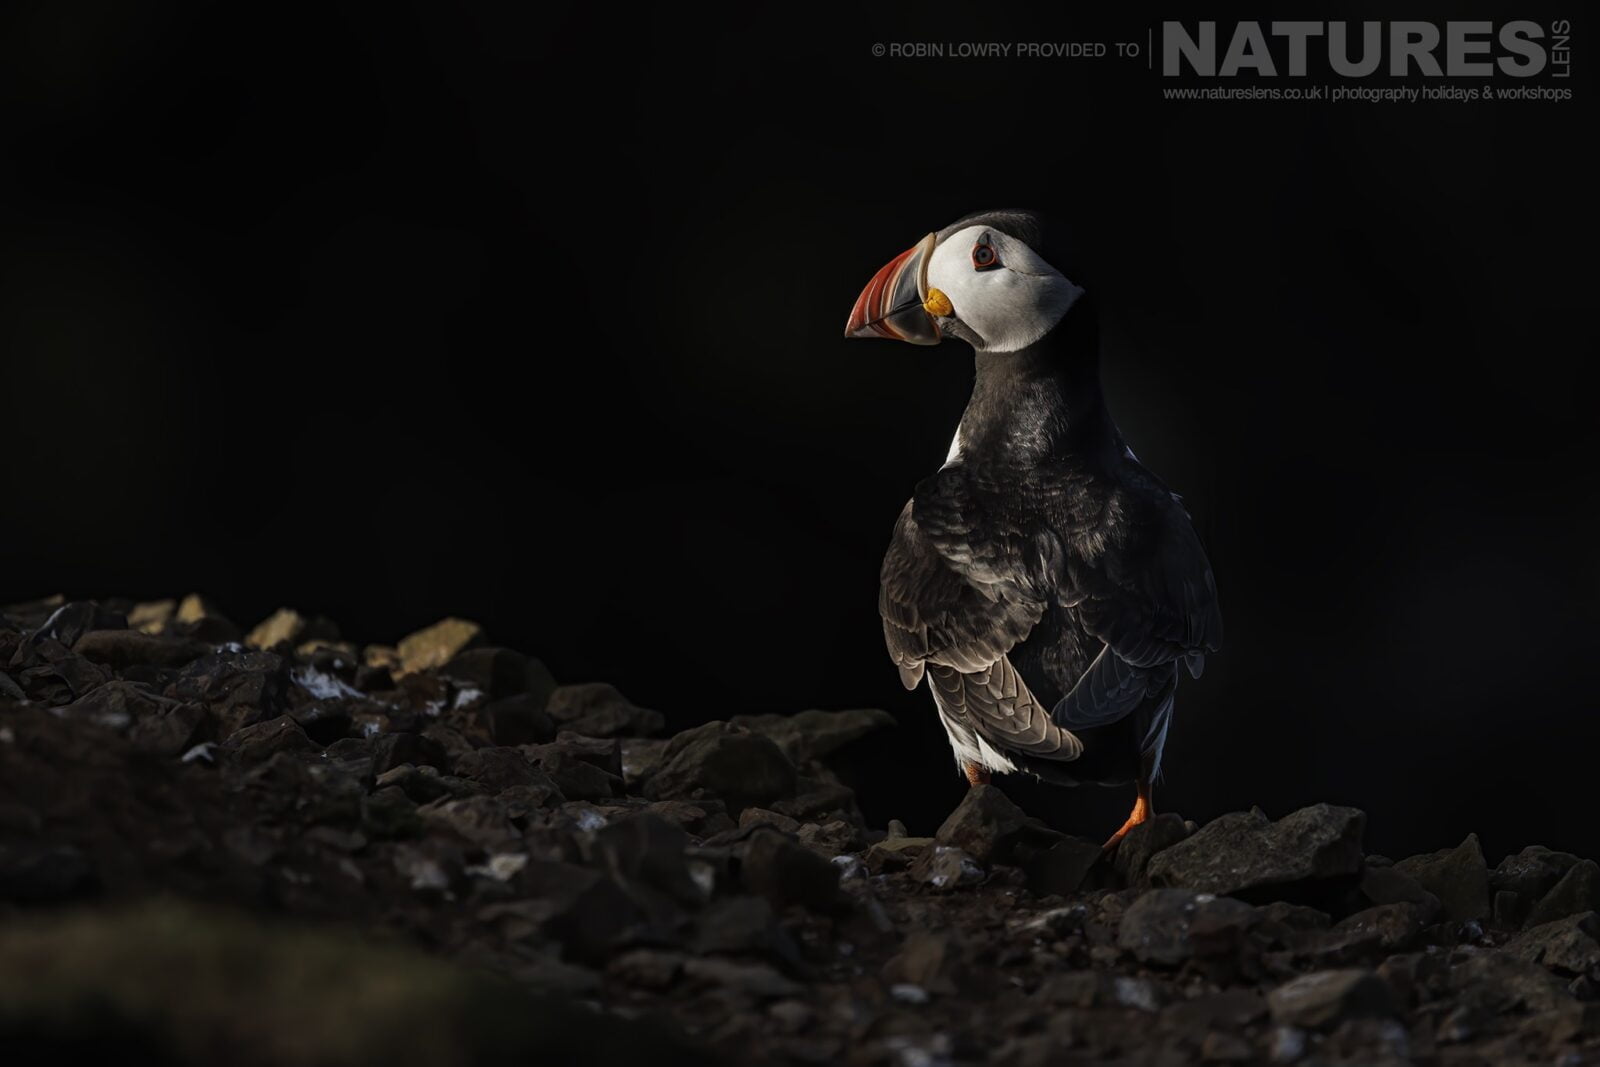 One Of The Puffins Of Skomer Poses In The Late Light Of The Day This Image Was Captured During The Natureslens Comical Puffins Of Skomer Island Photography Holiday